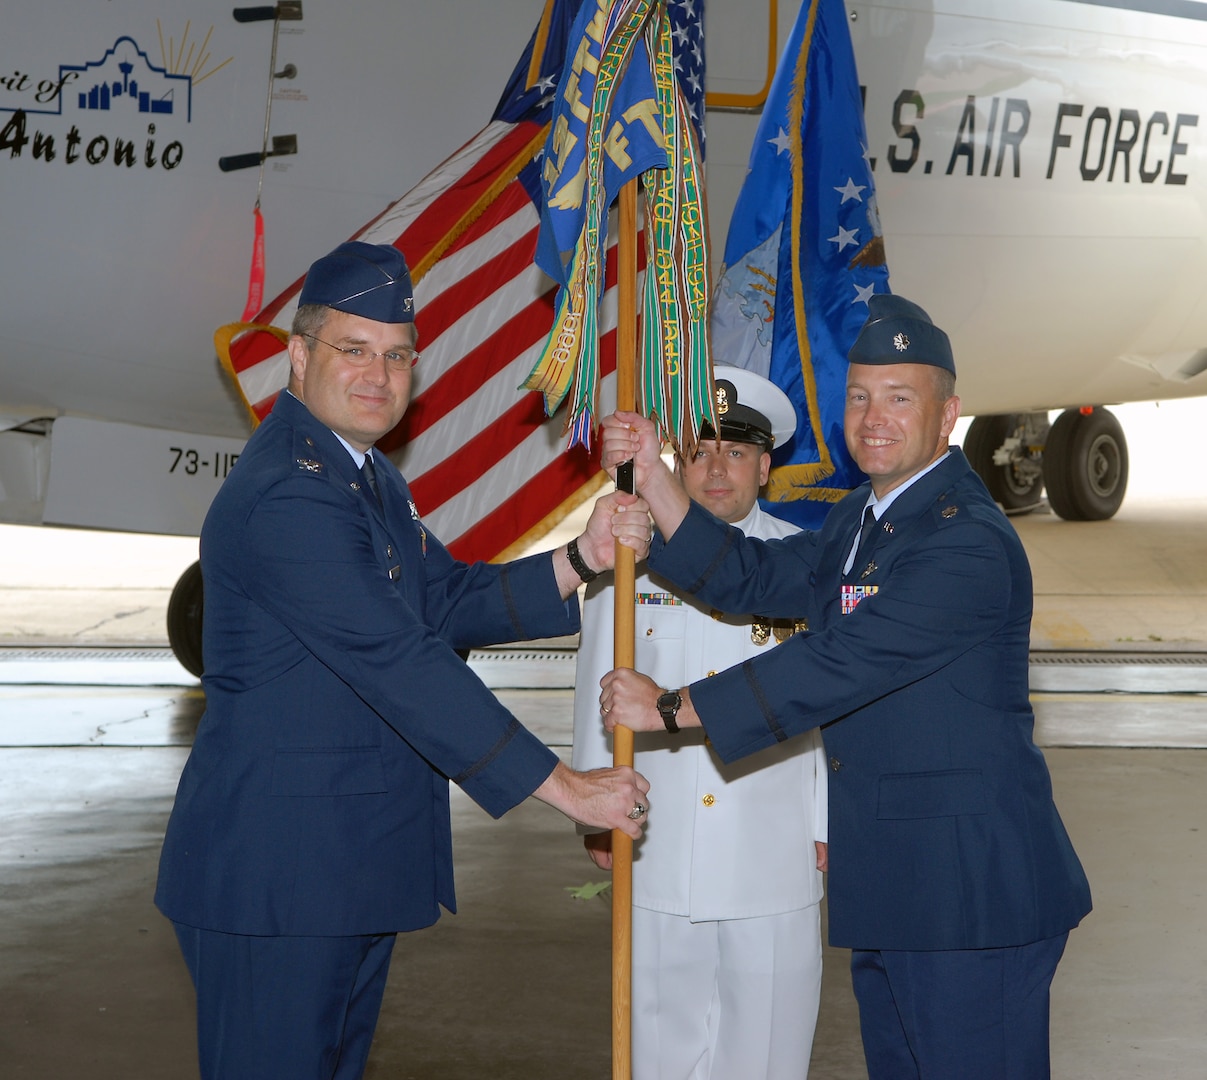 Col. Ronald Buckley (left), 12th Operations Group commander, passes command of the 562nd Flying Training Squadron to Lt. Col. Peter Deitschel during a change of command ceremony Aug. 29. The 562nd FTS recently began phasing out naval flight officer training, and the outgoing commander, Navy Cmdr. John Radka, is the last U.S. Navy officer to command the 562nd. (U.S. Air Force photo by Don Lindsey)